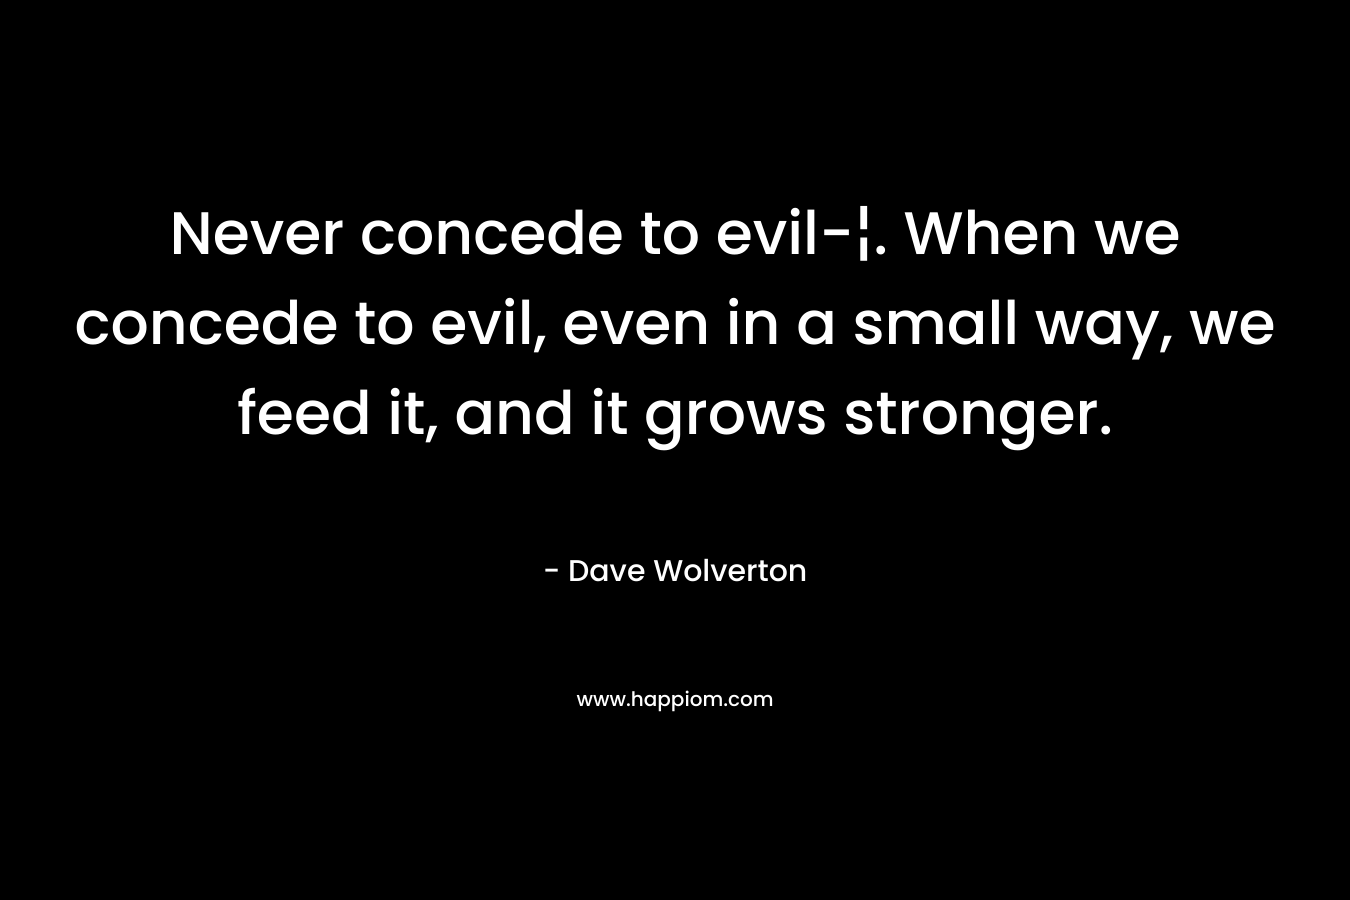 Never concede to evil-¦. When we concede to evil, even in a small way, we feed it, and it grows stronger.